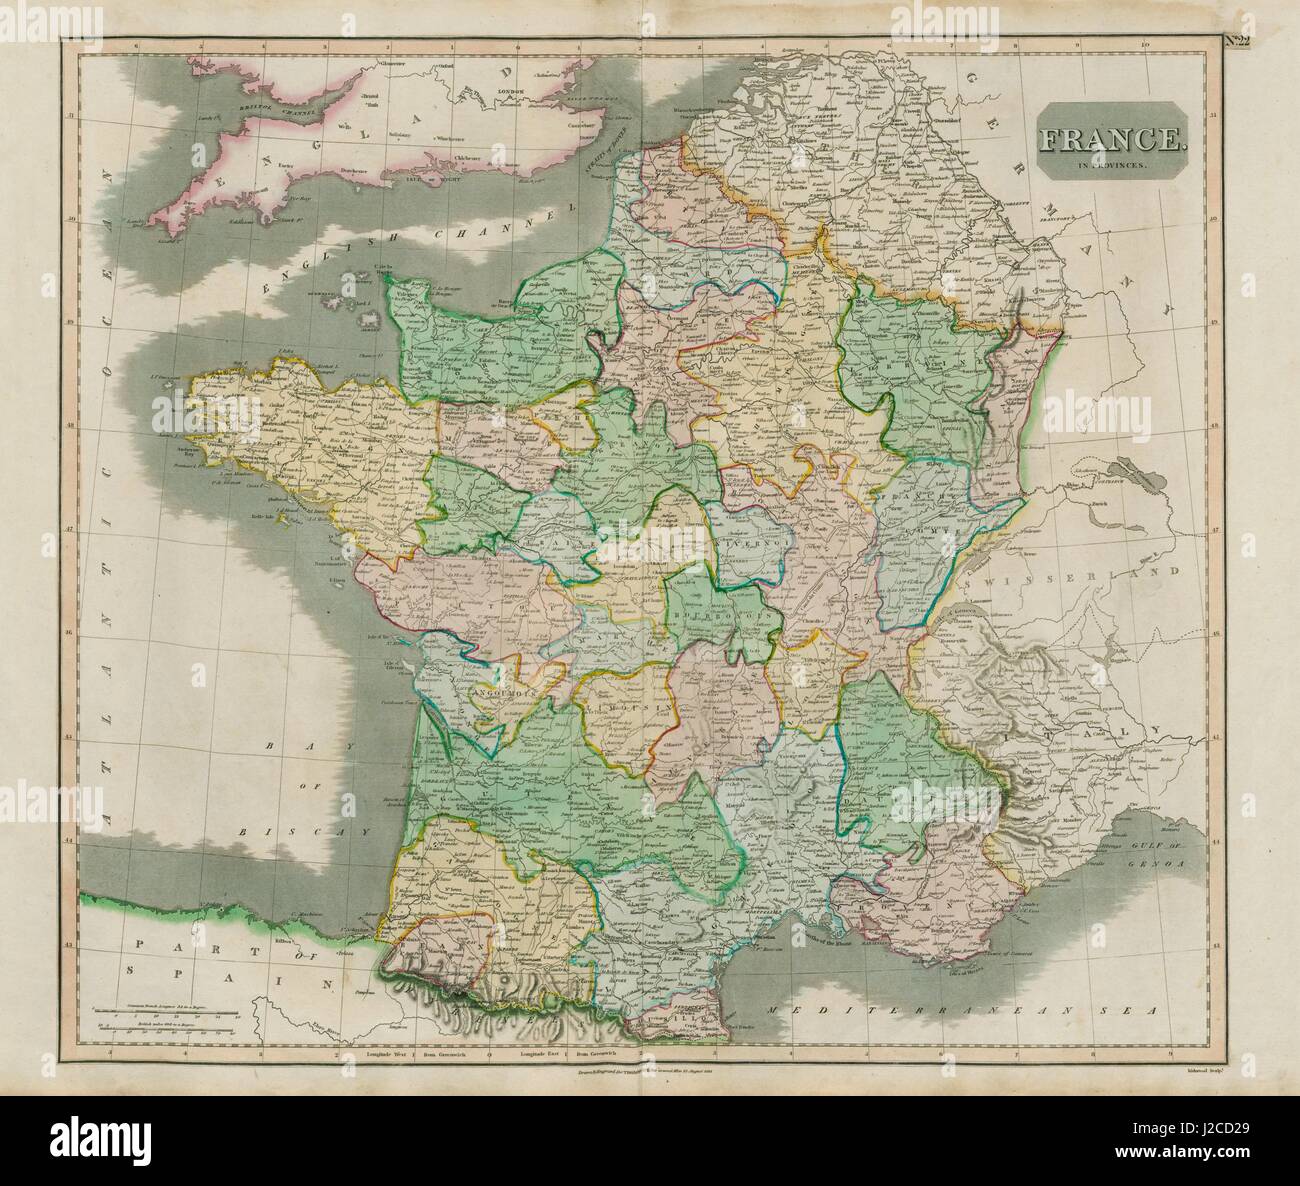 'France in provinces', before the Revolution, w/o Savoy & Nice. THOMSON 1817 map Stock Photo